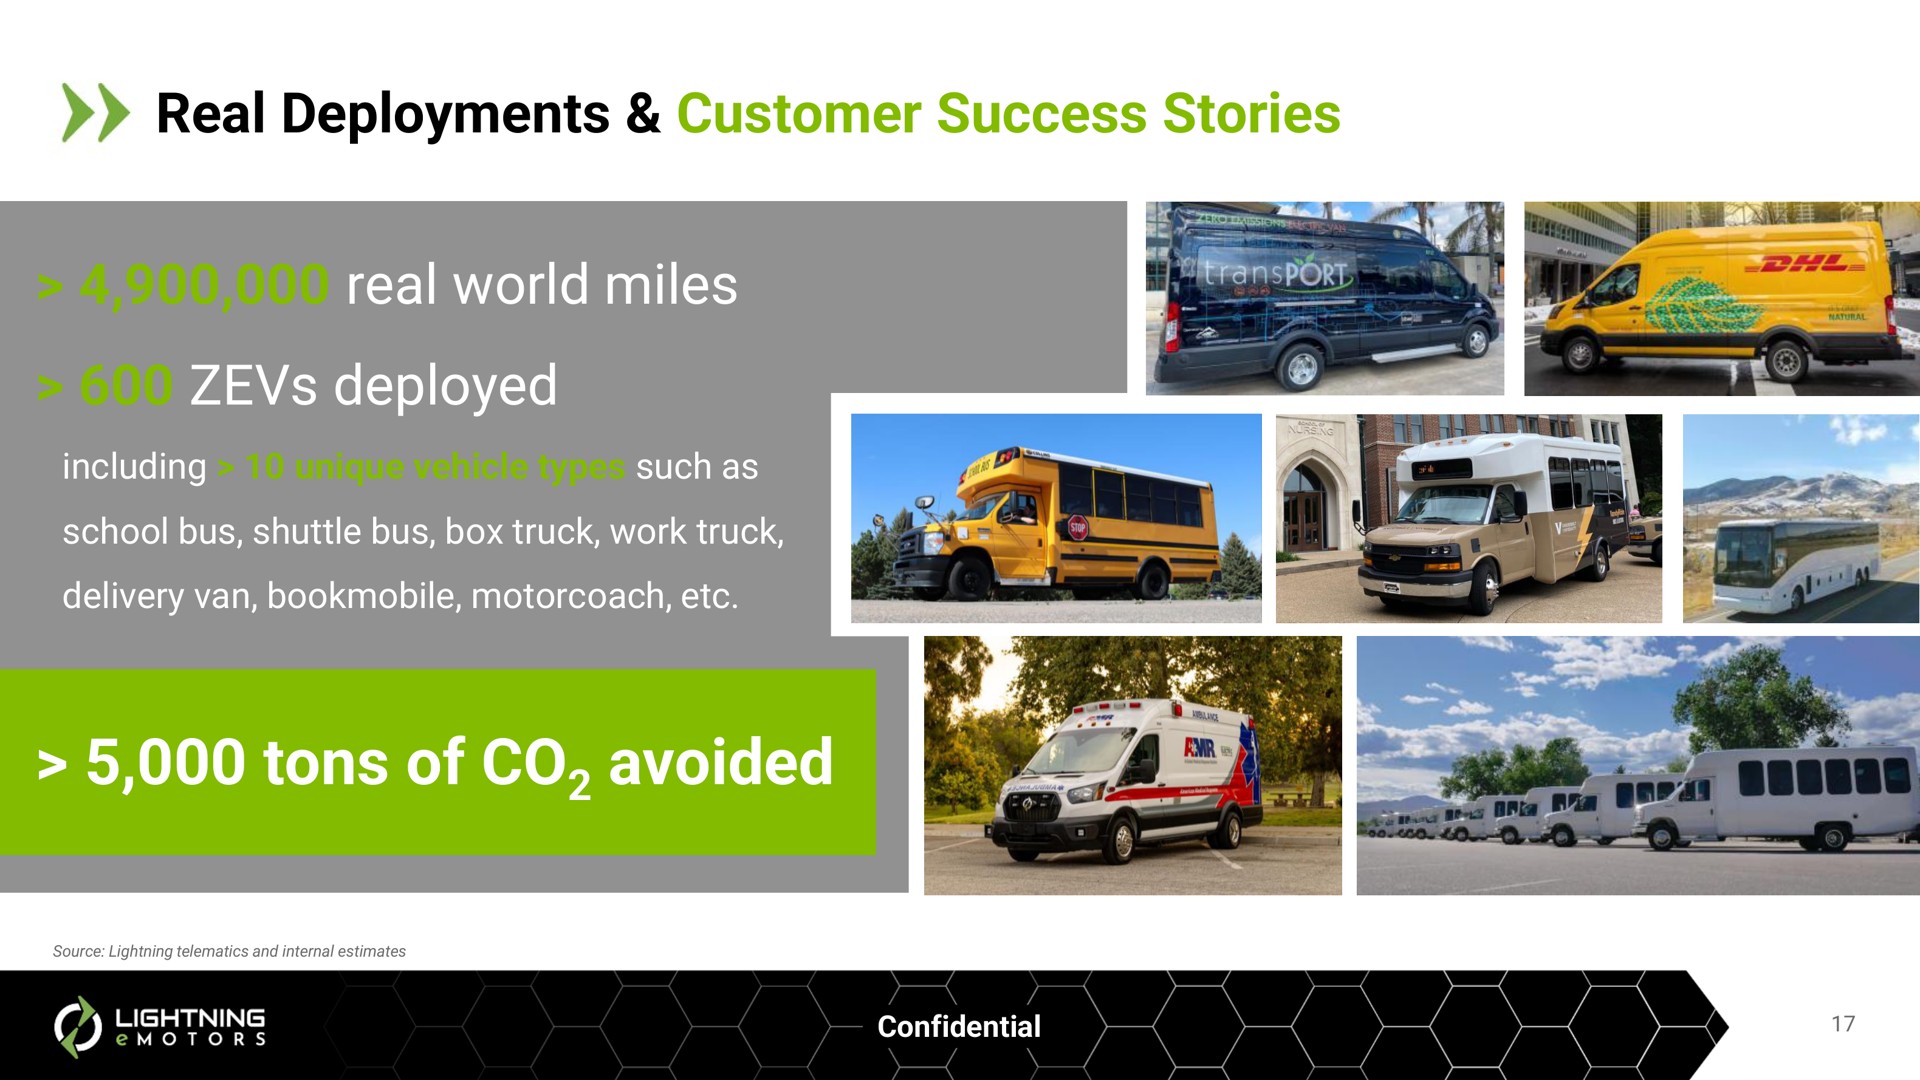 real deployments customer success stories real world miles deployed tons of avoided | Lightning eMotors